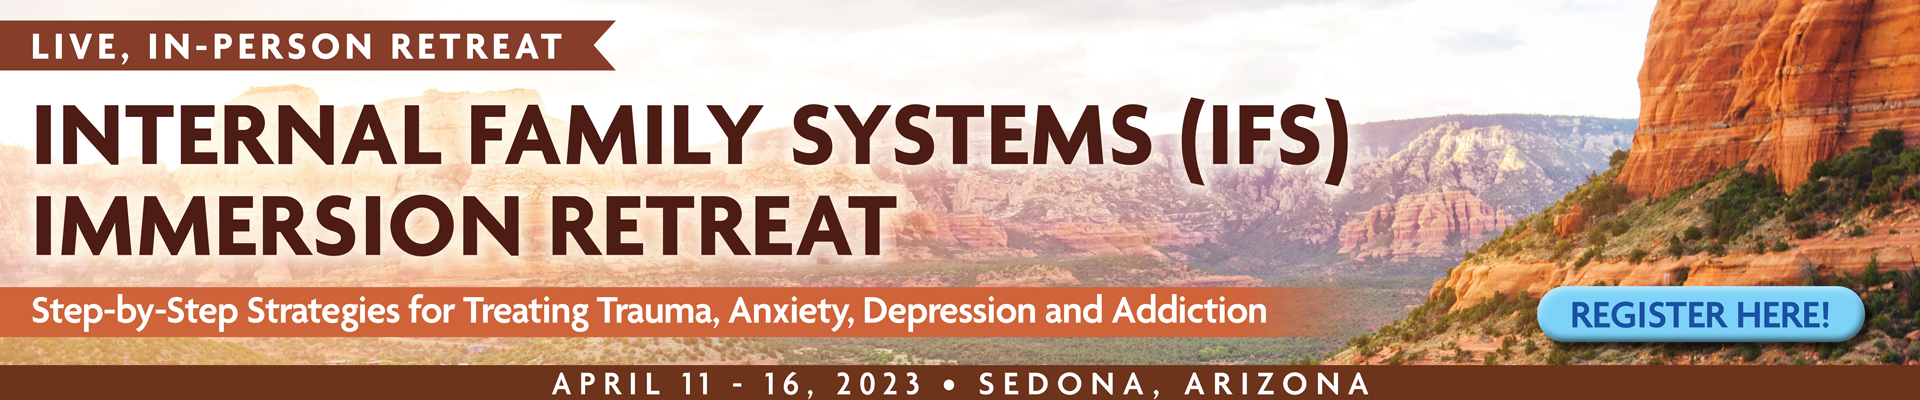 6-Day Internal Family Systems (IFS) Immersion Retreat: Step-by-Step Strategies for Treating Trauma, Anxiety, Depression and Addiction